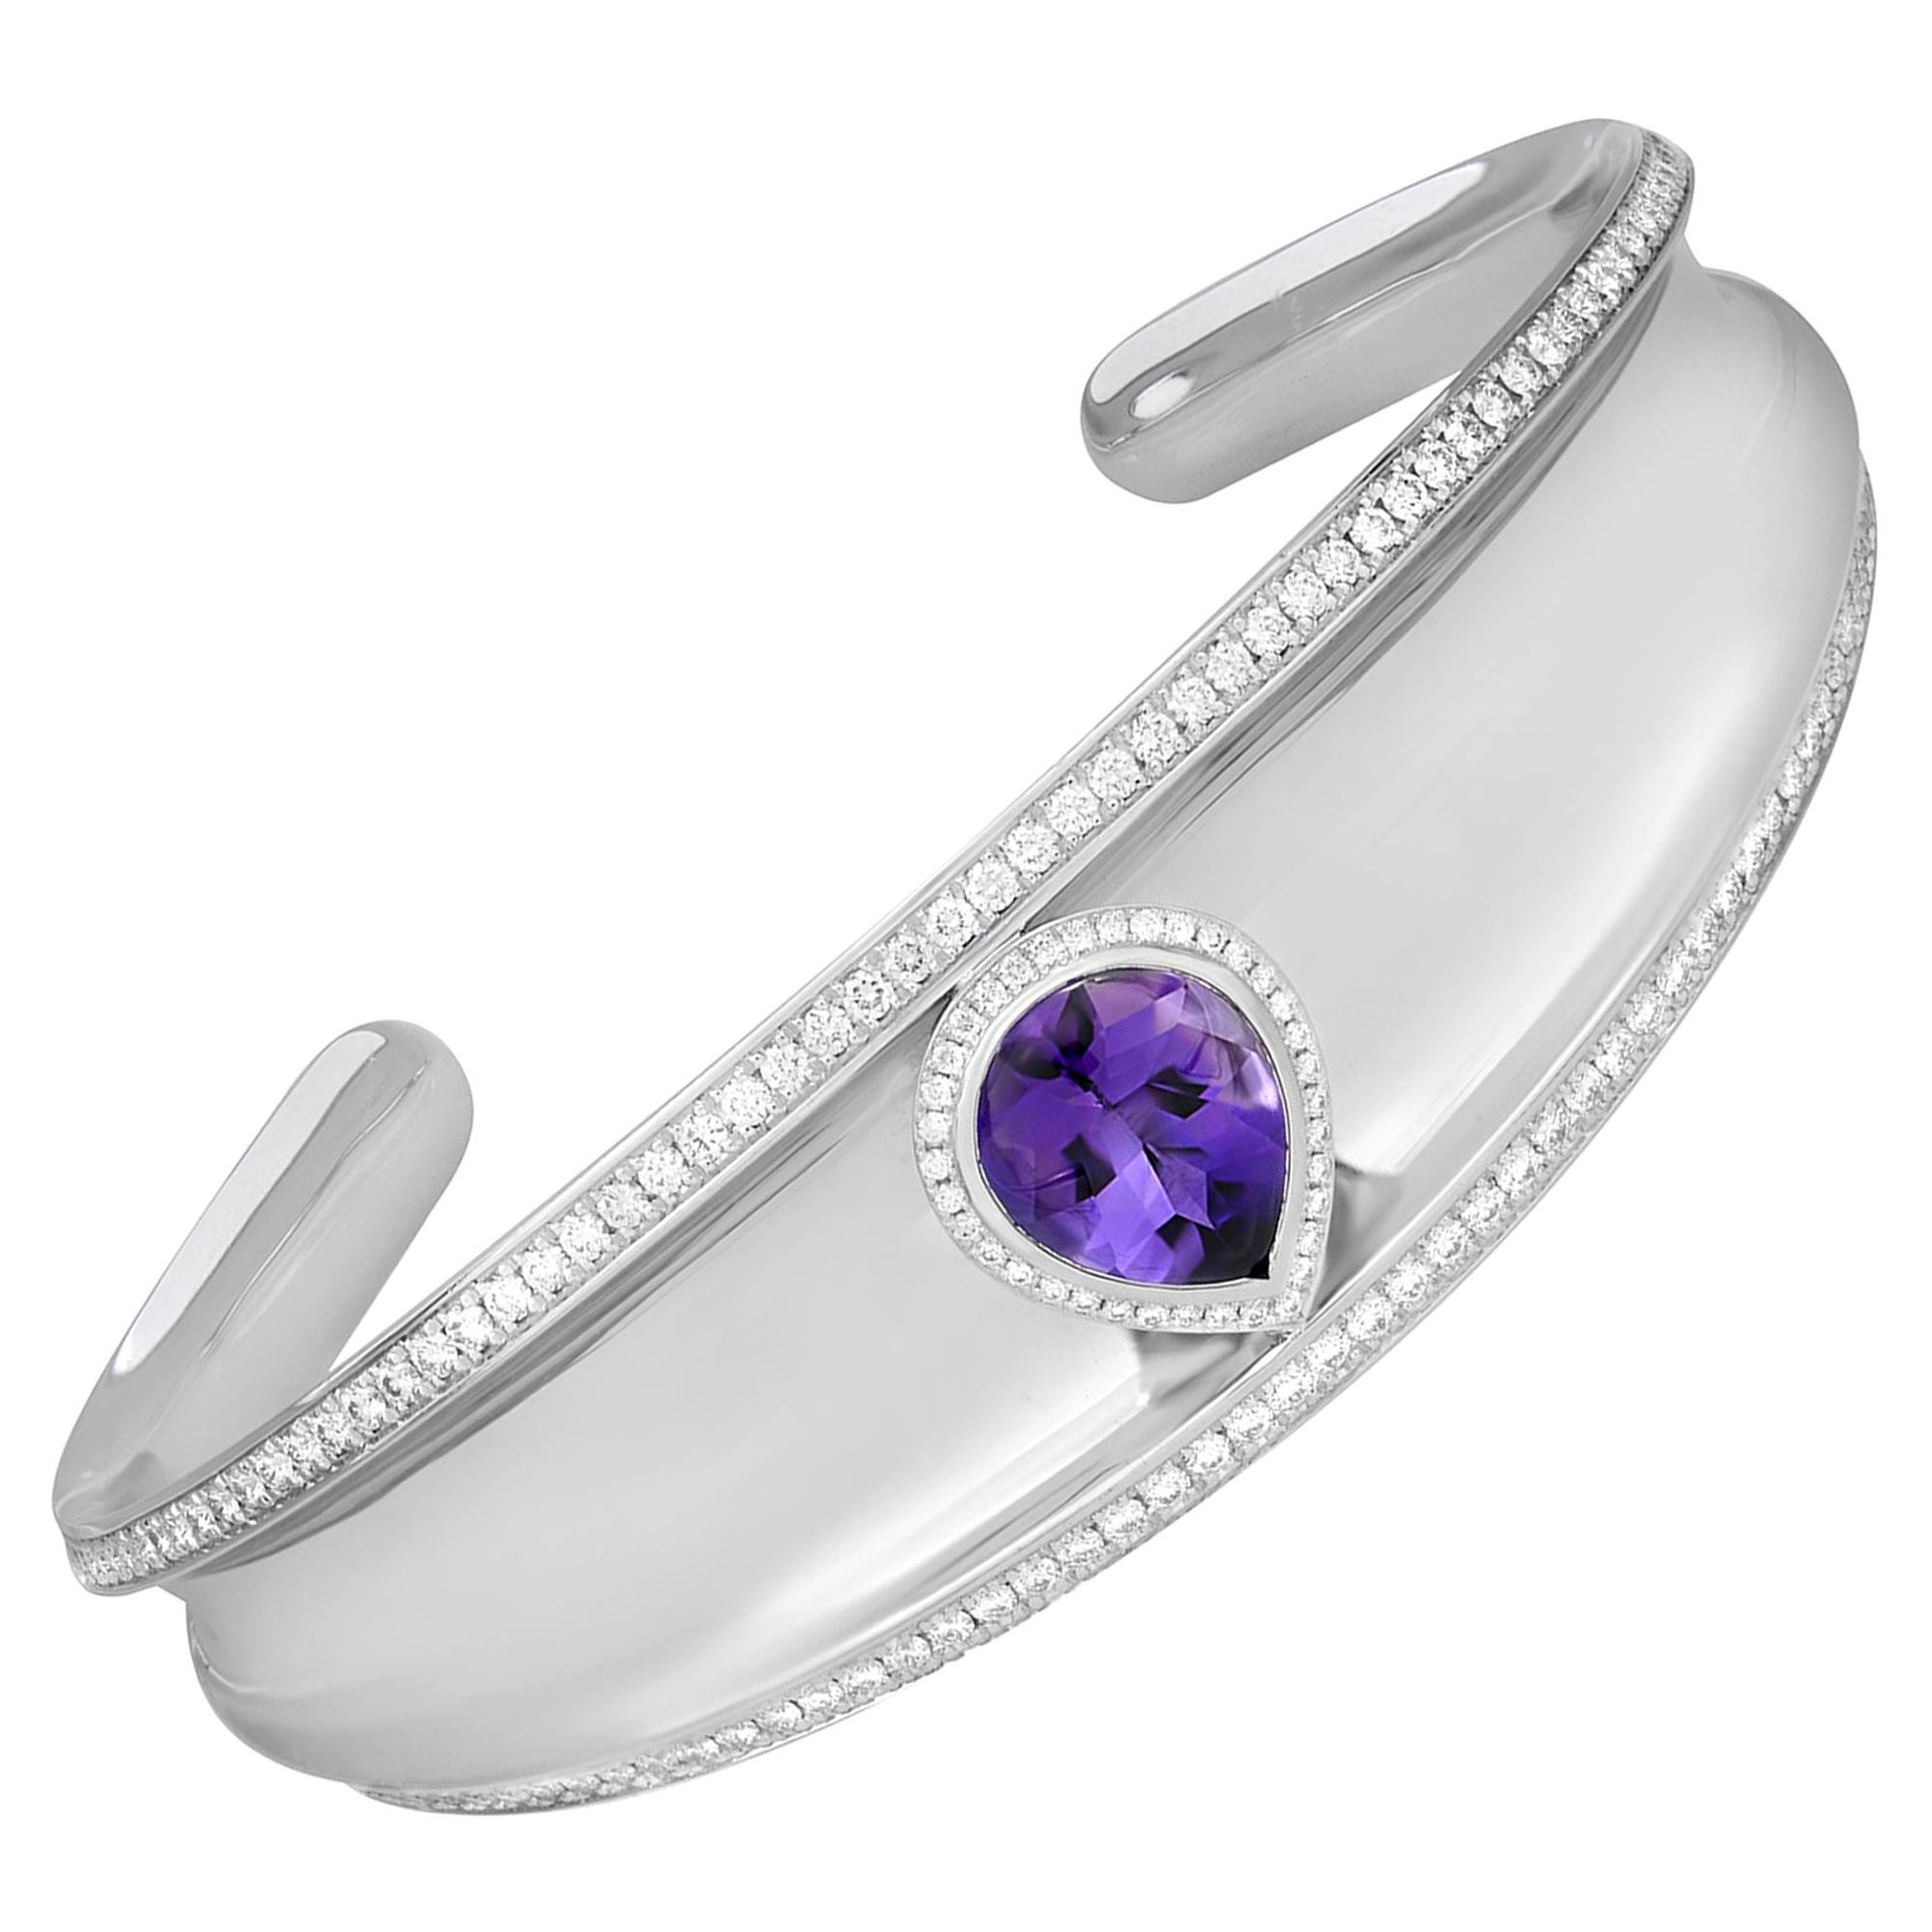 Chopard Imperiale Amethyst and Diamonds Cuff Bracelet 18k White Gold 2.38cttw